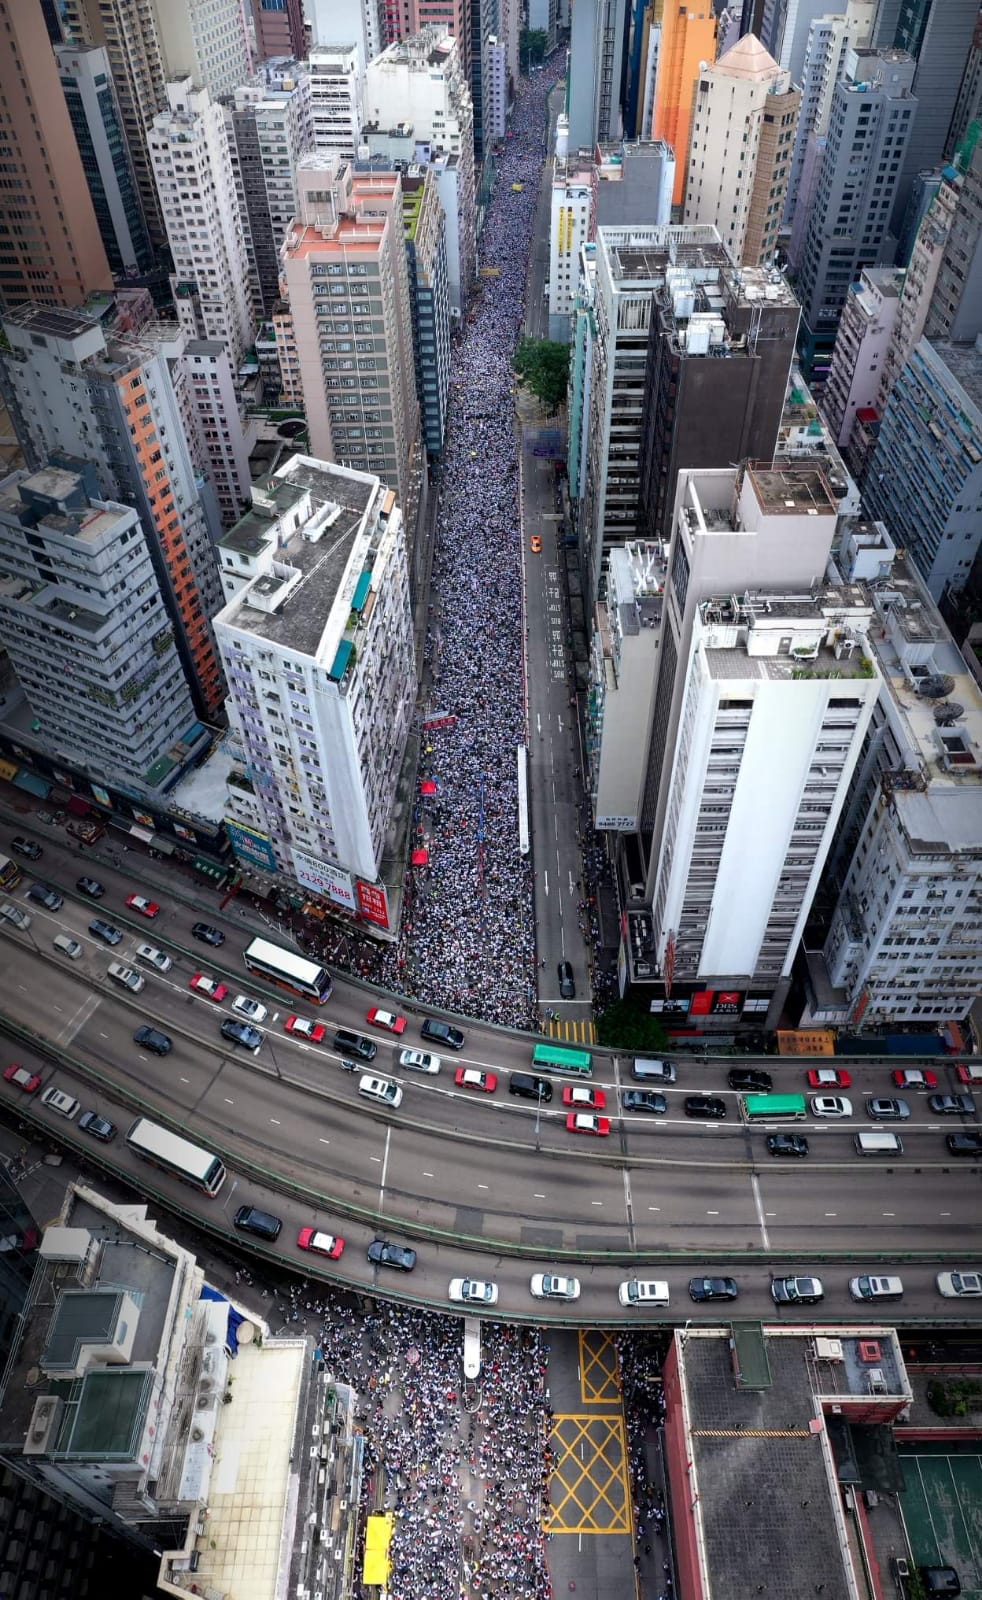 Arial view of the protests in Hong Kong